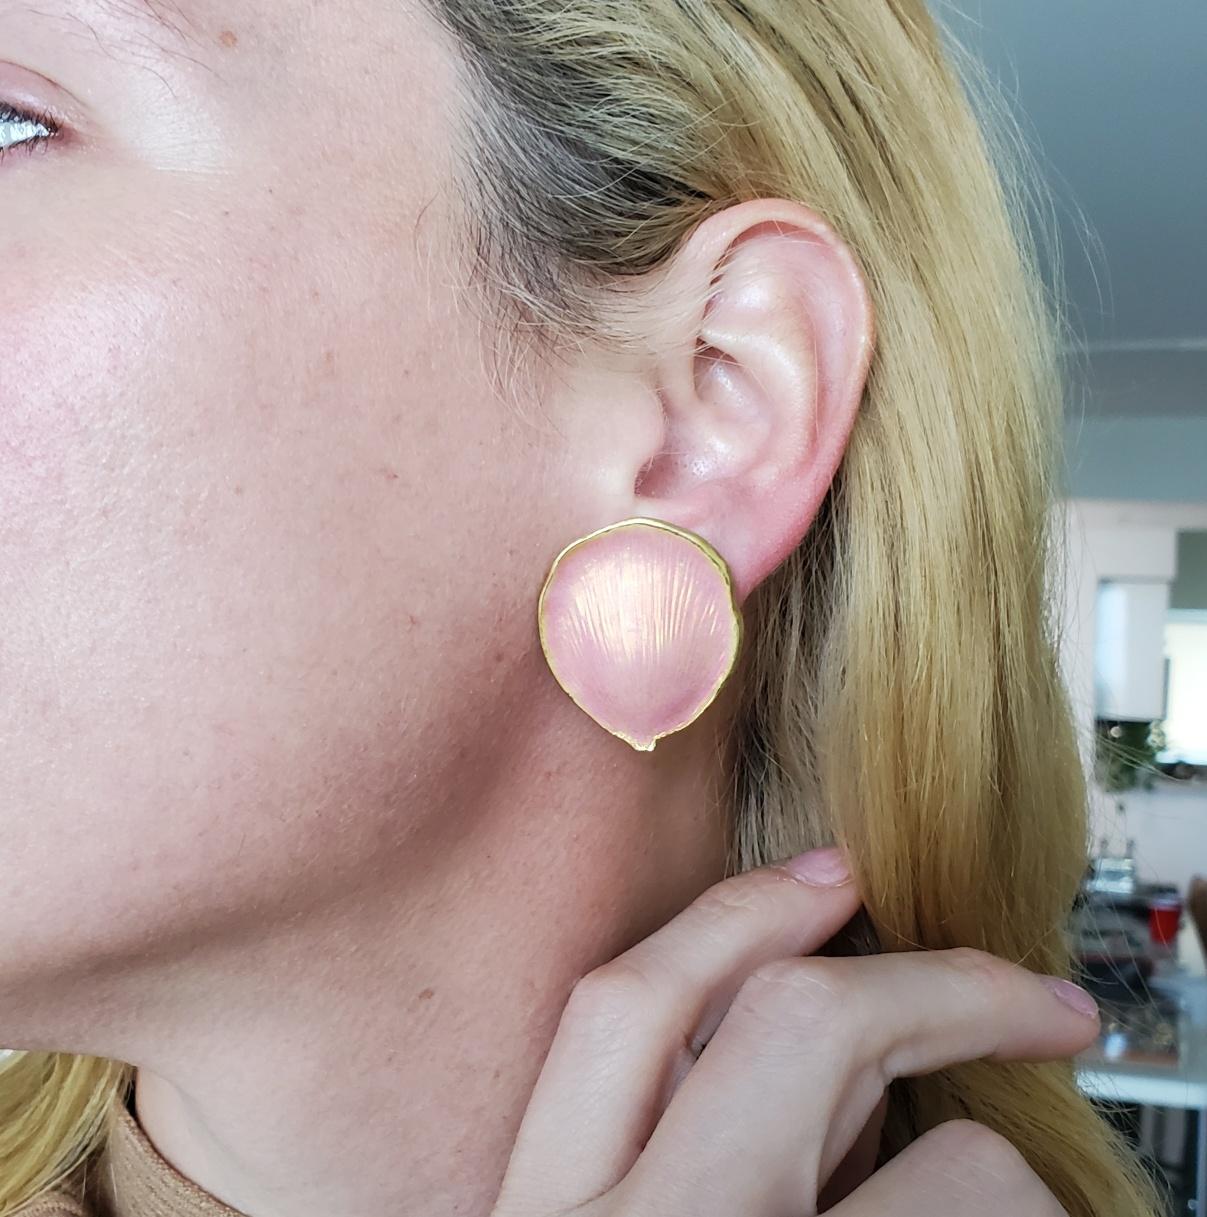 Rose petals clips earrings designed by Angela Cummings.

An extremely rare pair of clips earrings designed in New York city by the iconic designer Angela Cummings, back in the 1996. These exceptional pieces has been crafted in solid yellow gold of